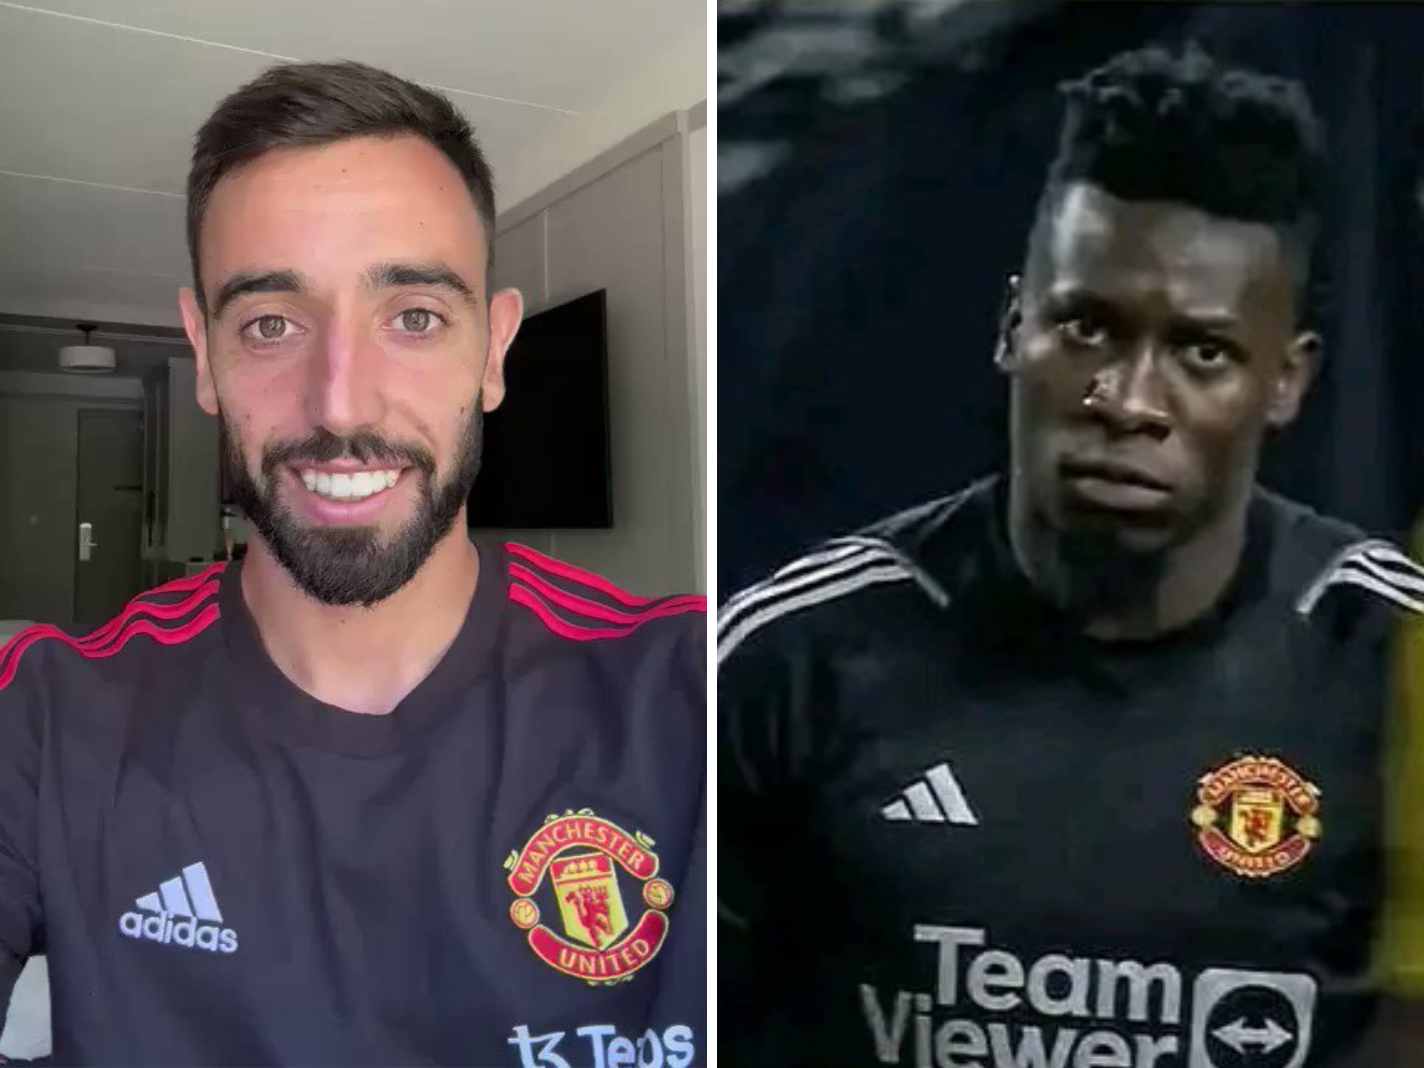 Bruno, Shaw and Onana: FPL Tips on Popular Manchester United Assets